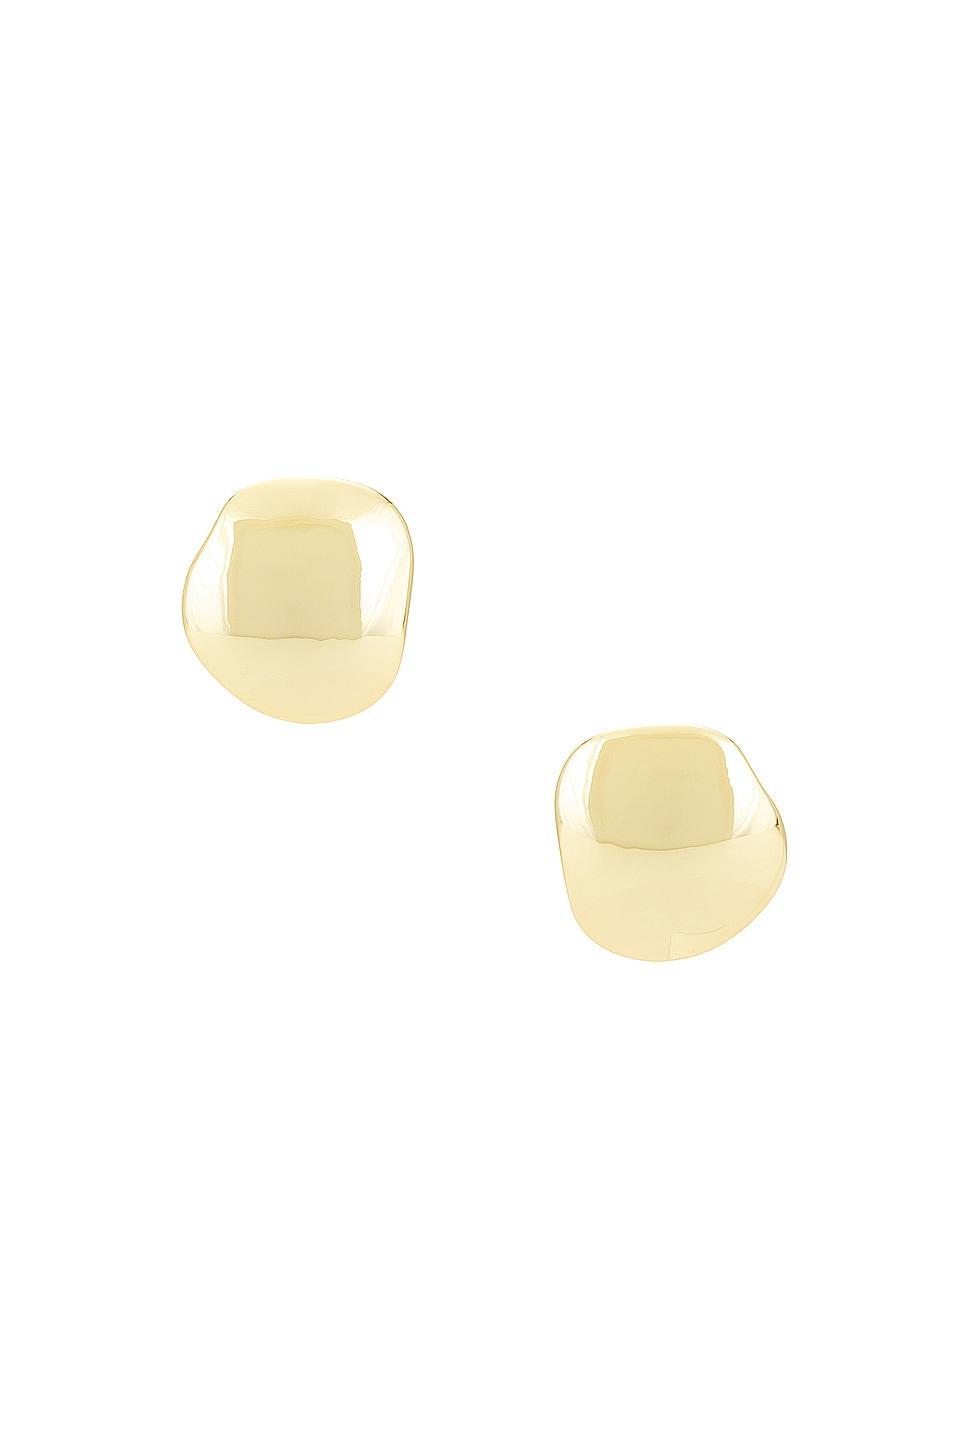 Lele Sadoughi Discus Button Earrings in 14K Gold Plated Product Image